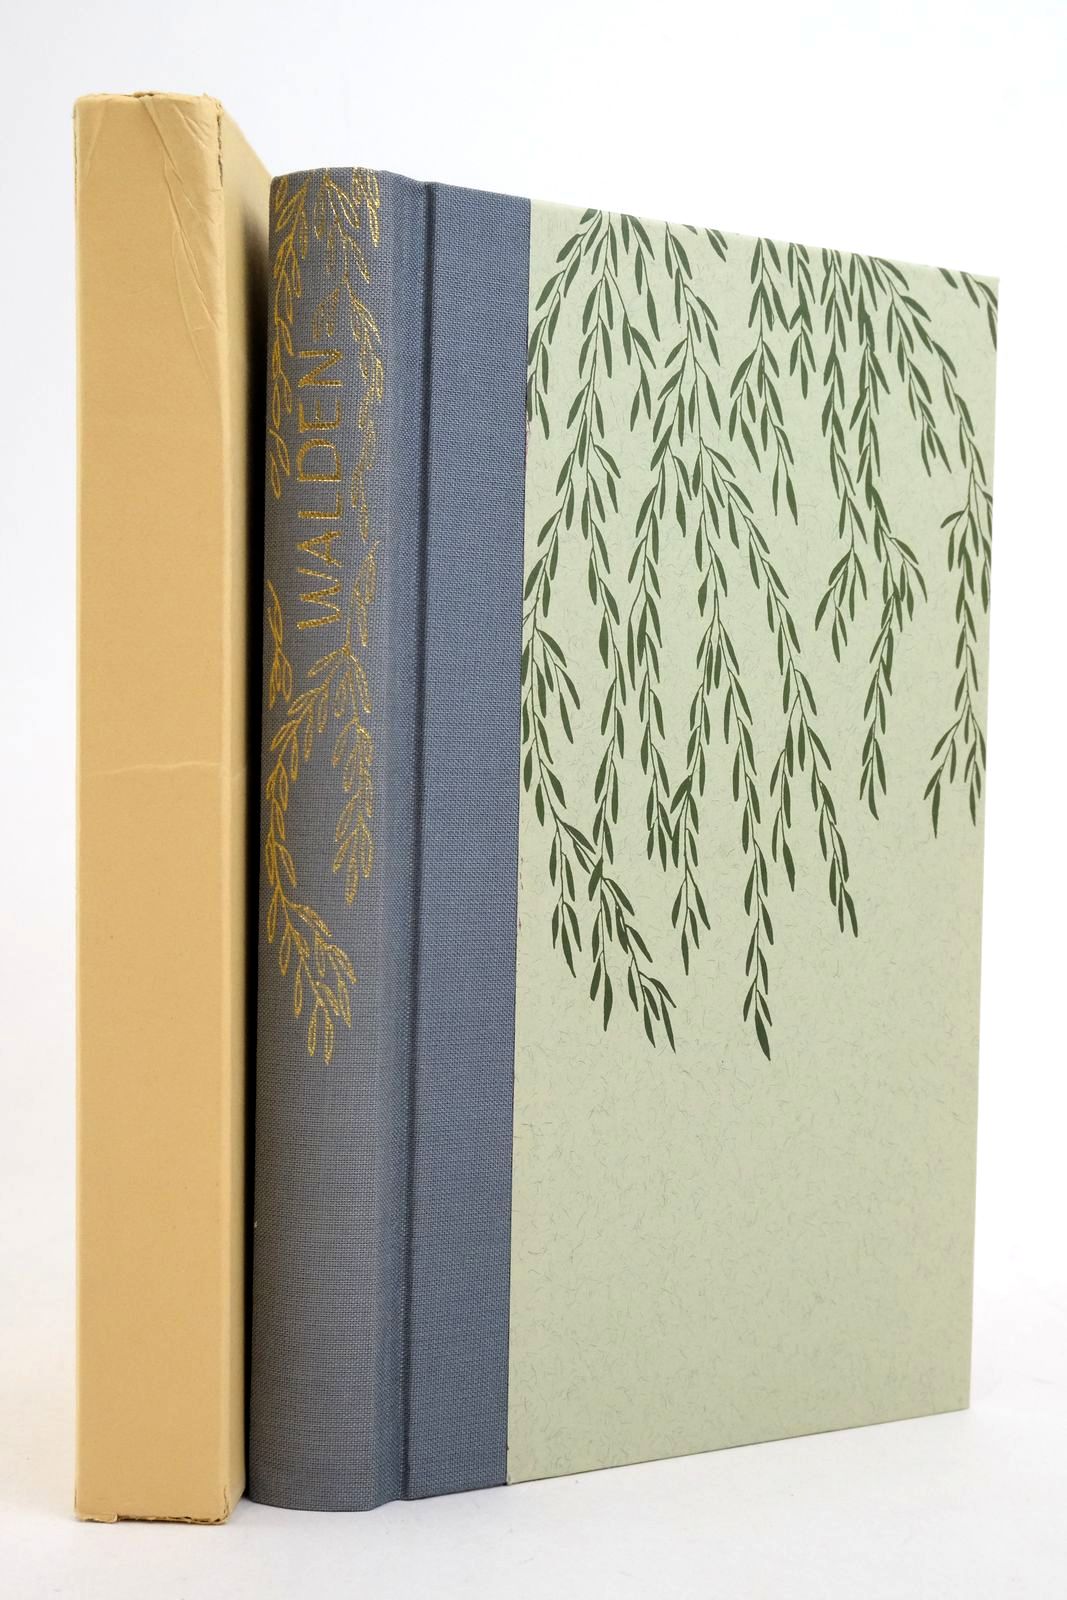 Photo of WALDEN written by Thoreau, Henry David Ward, Colin illustrated by Renton, Michael published by Folio Society (STOCK CODE: 2138287)  for sale by Stella & Rose's Books